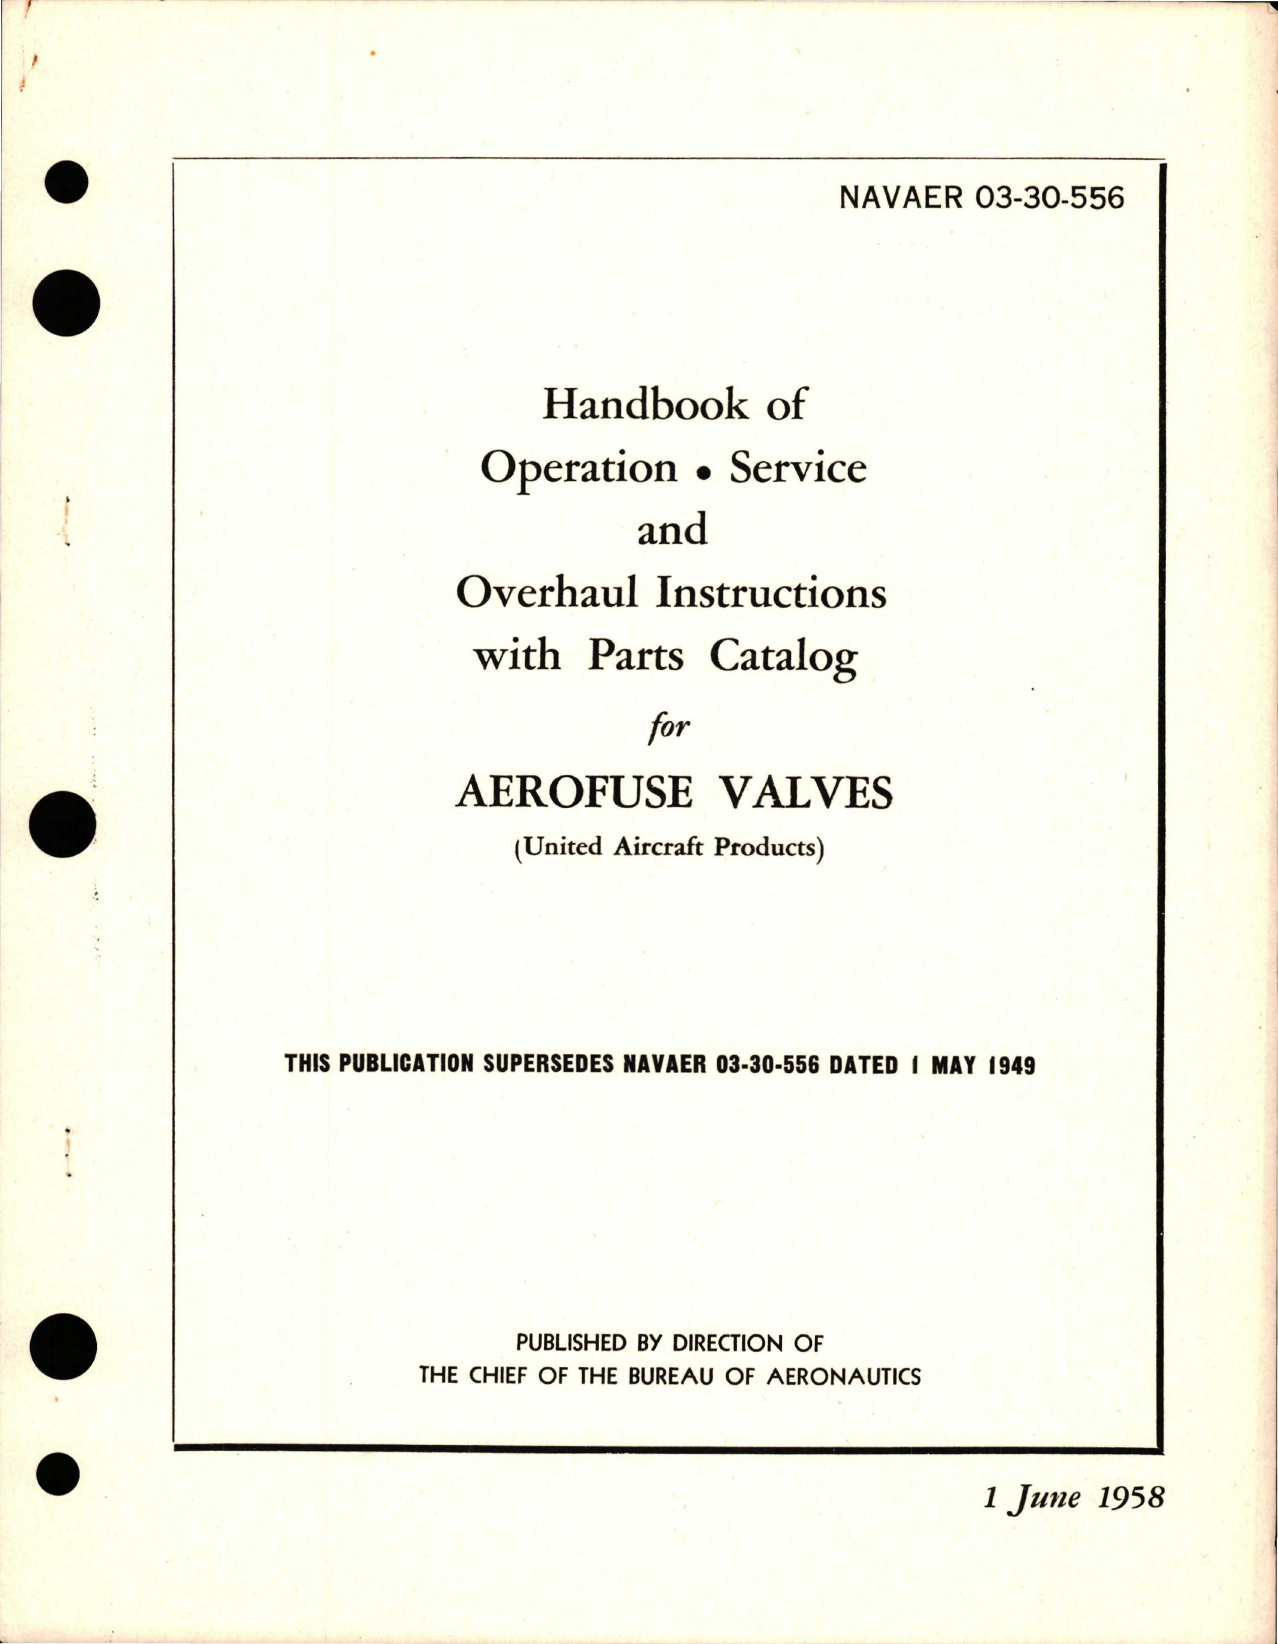 Sample page 1 from AirCorps Library document: Operation, Service and Overhaul Instructions with Parts Catalog for Aerofuse Valves